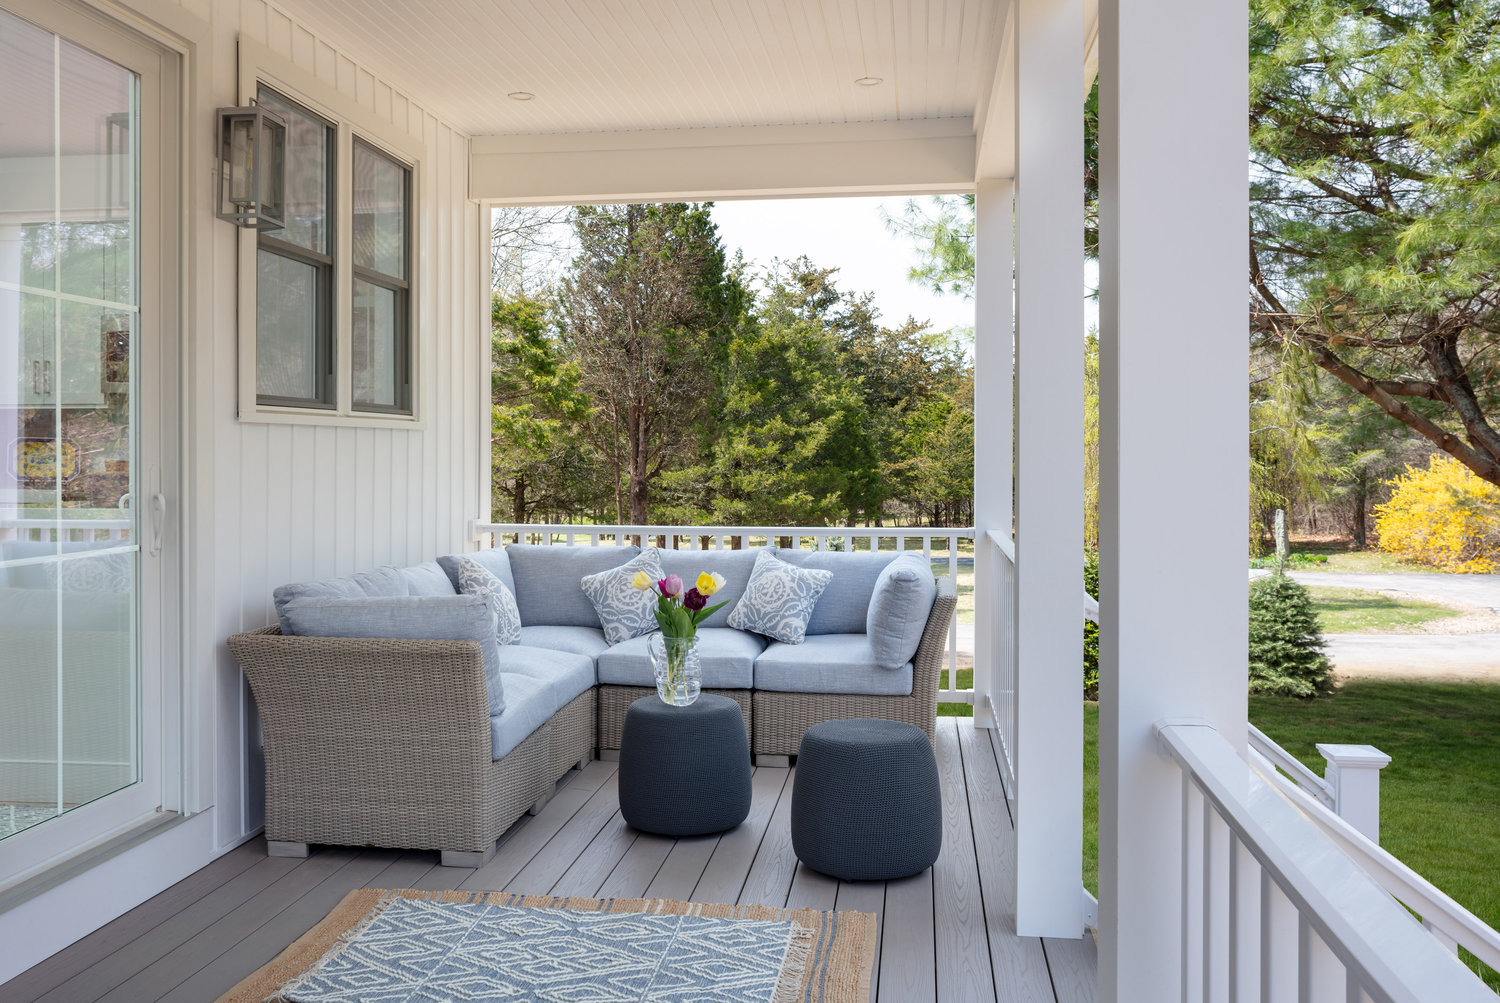 A furnished veranda becomes a true outdoor living space all summer long.